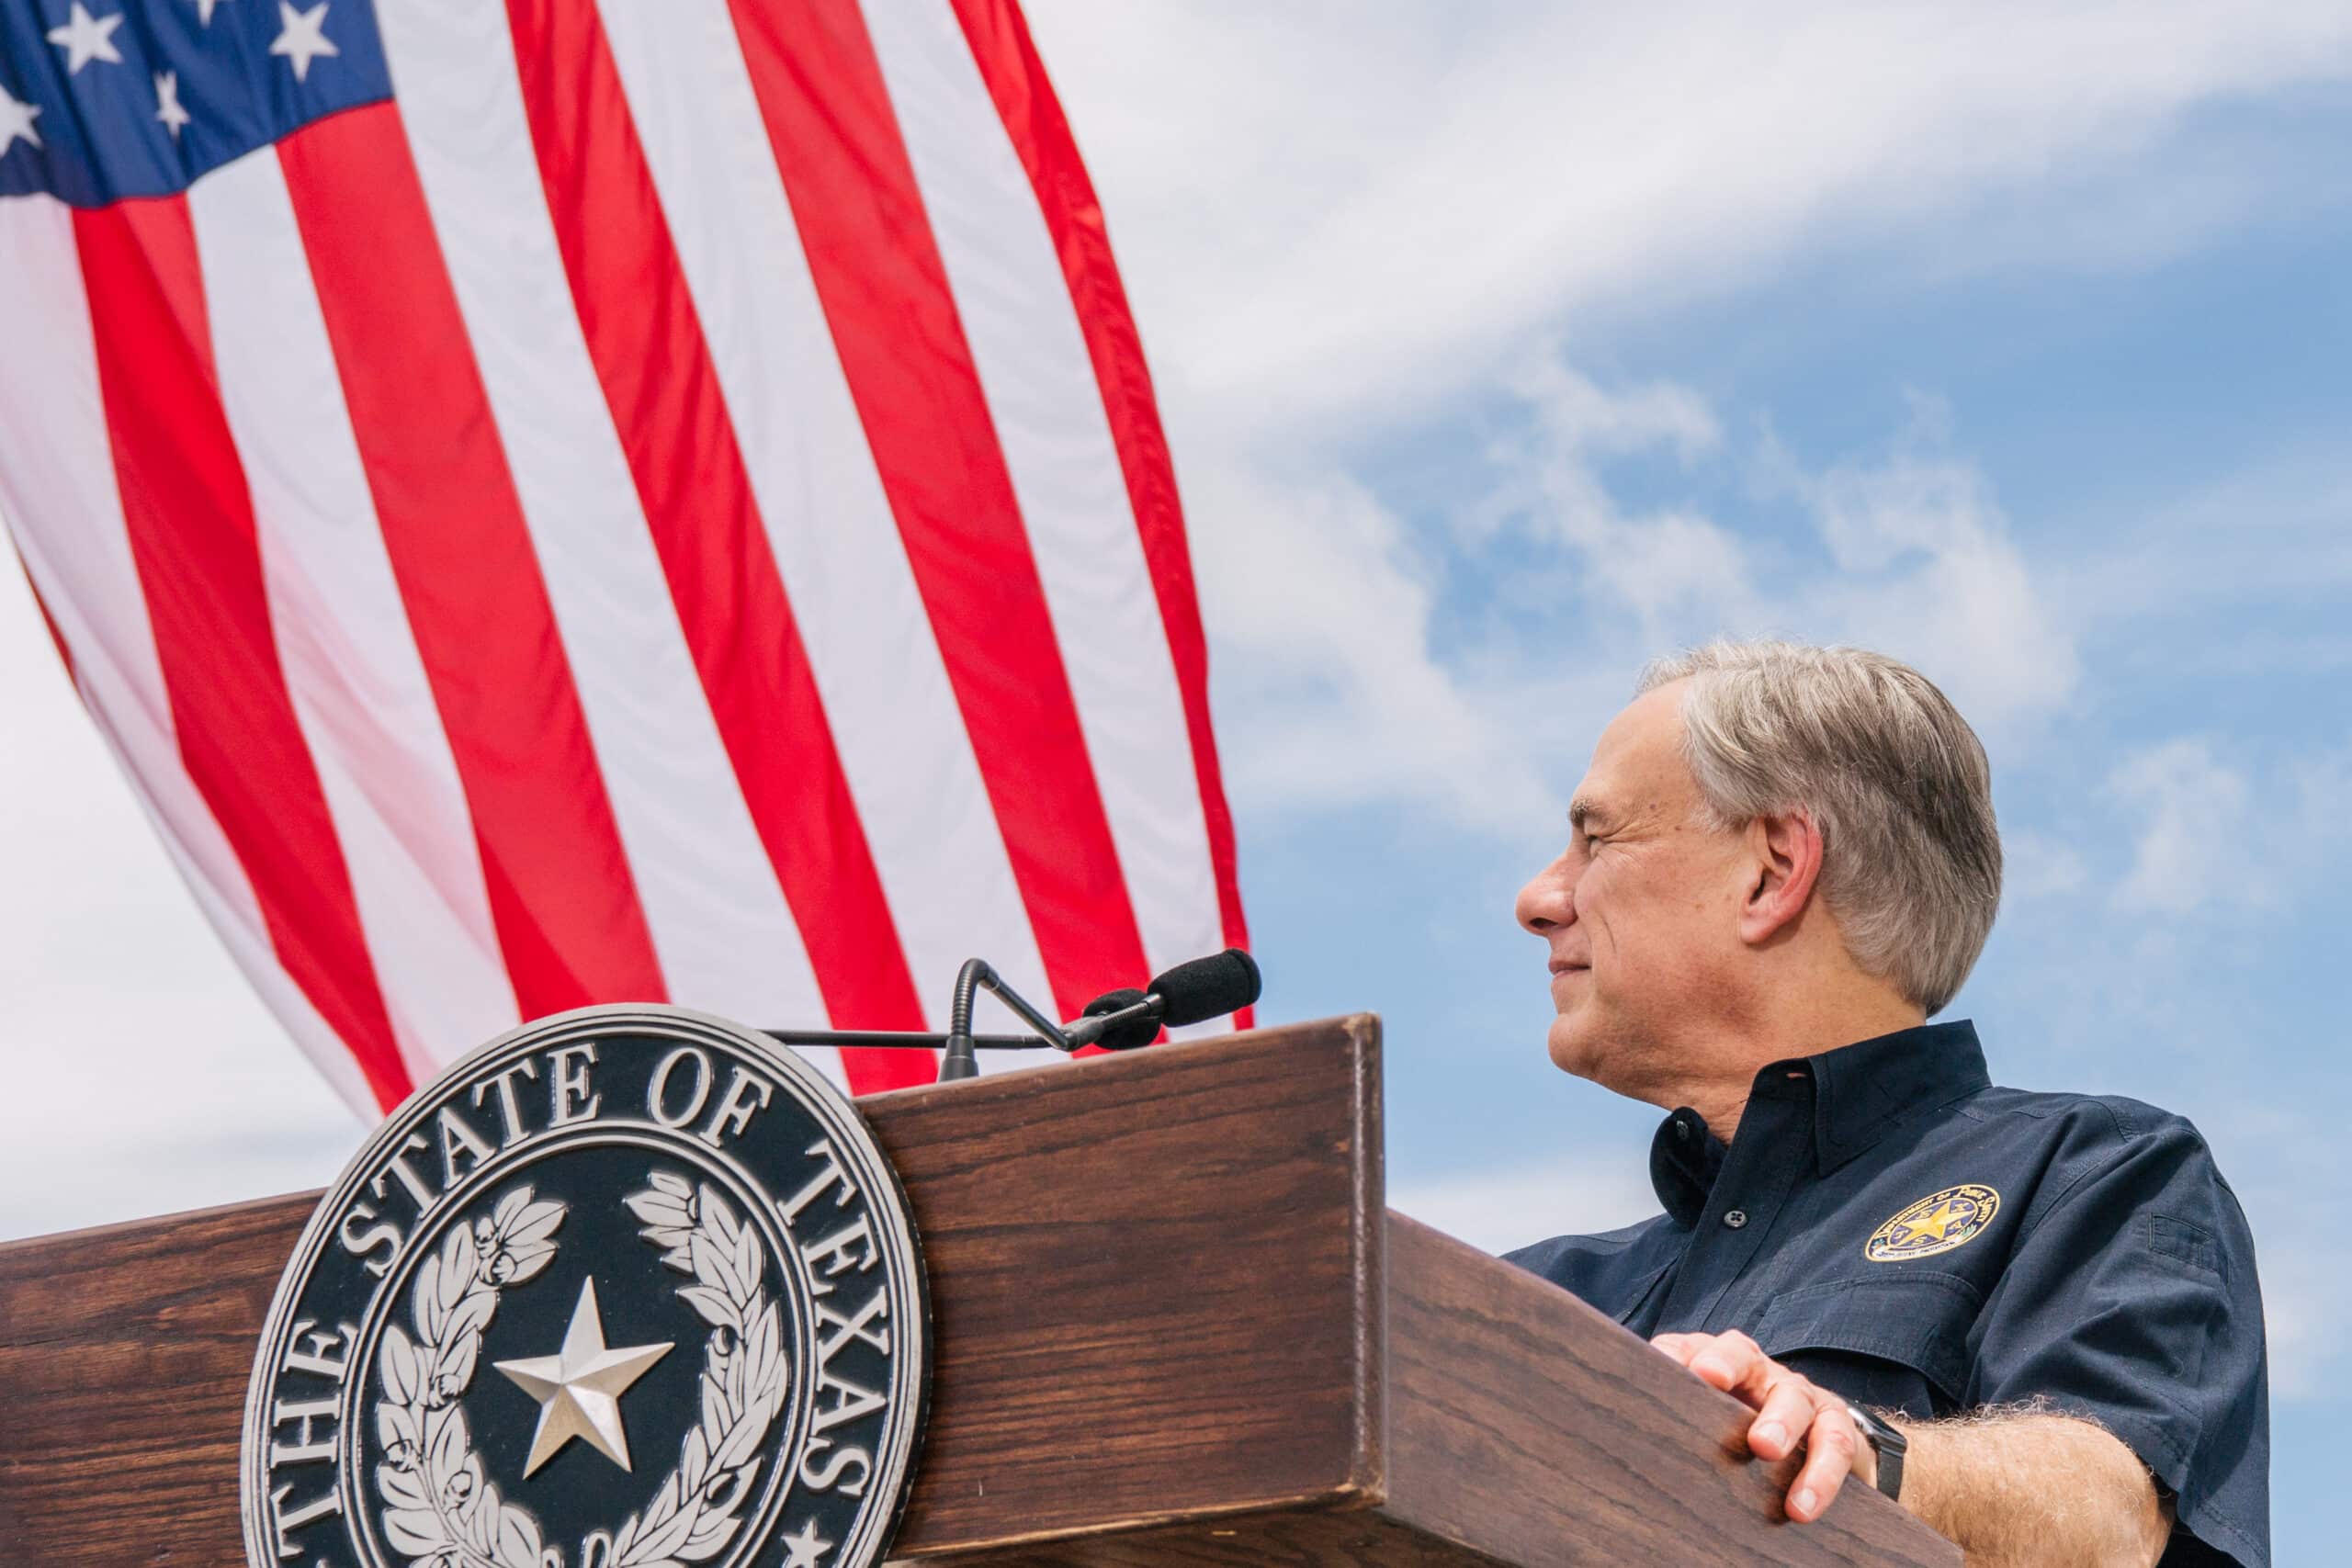 Texas election reform bill signed into law by Gov. Greg
Abbott 1